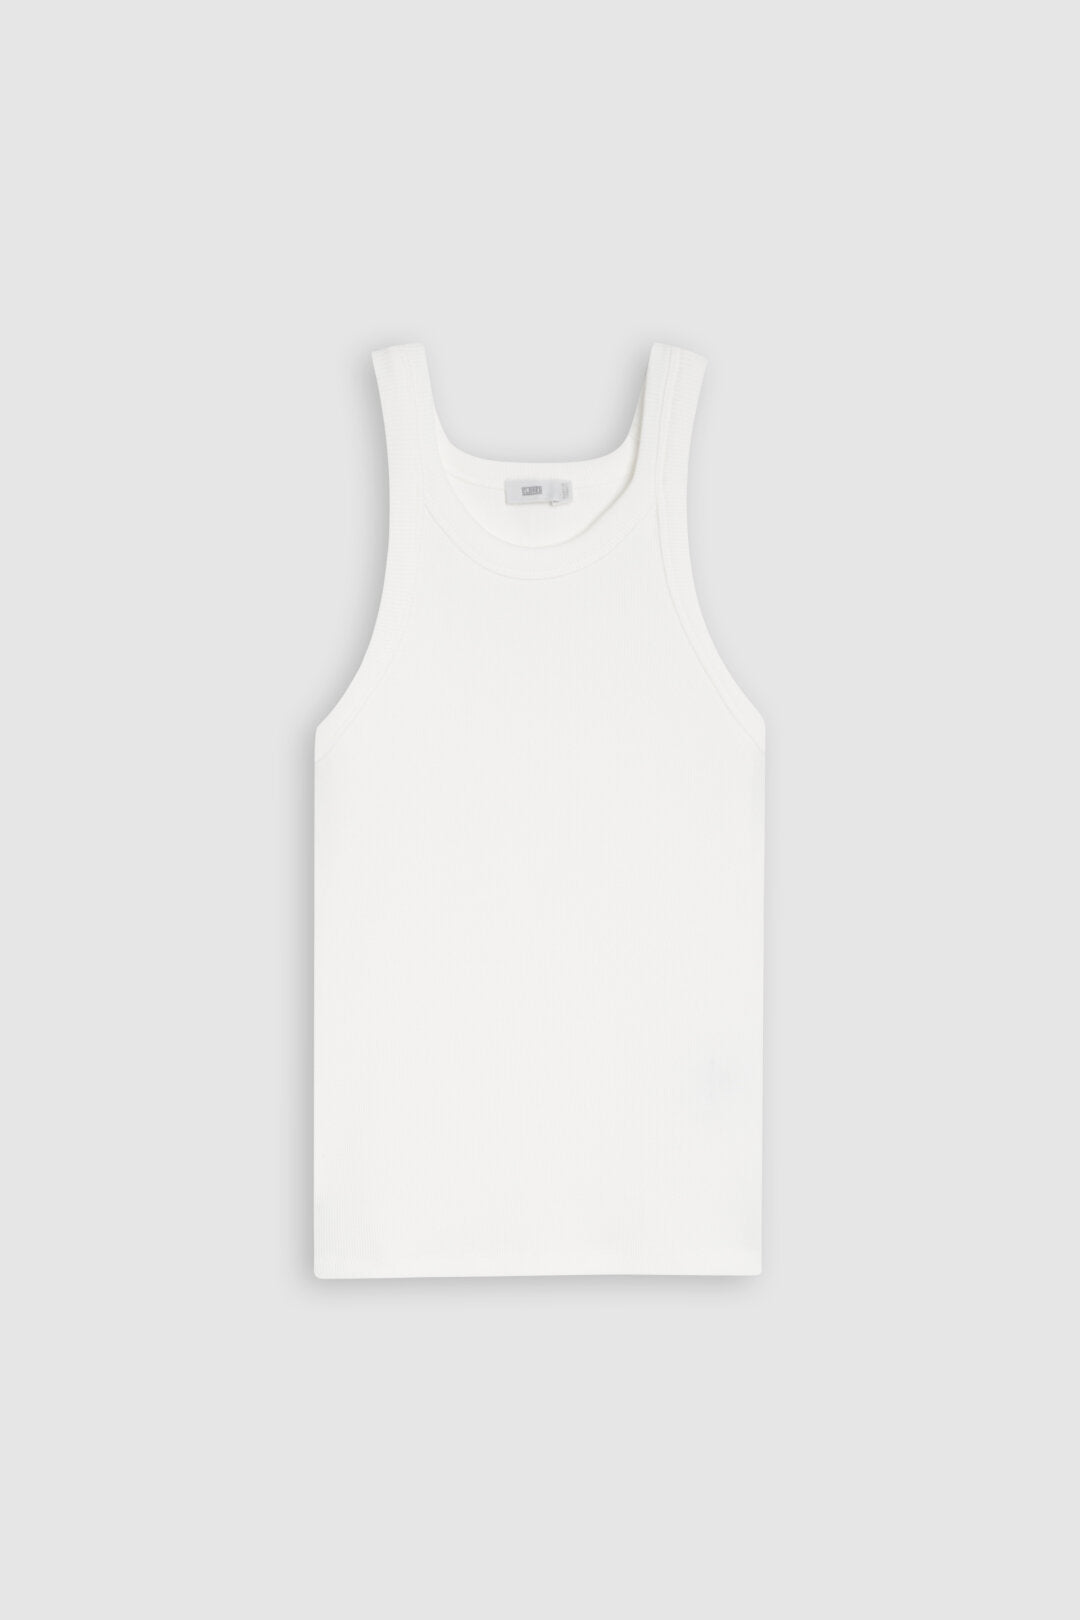 CLOSED TANKTOP IVORY WHITE - S. LABELS